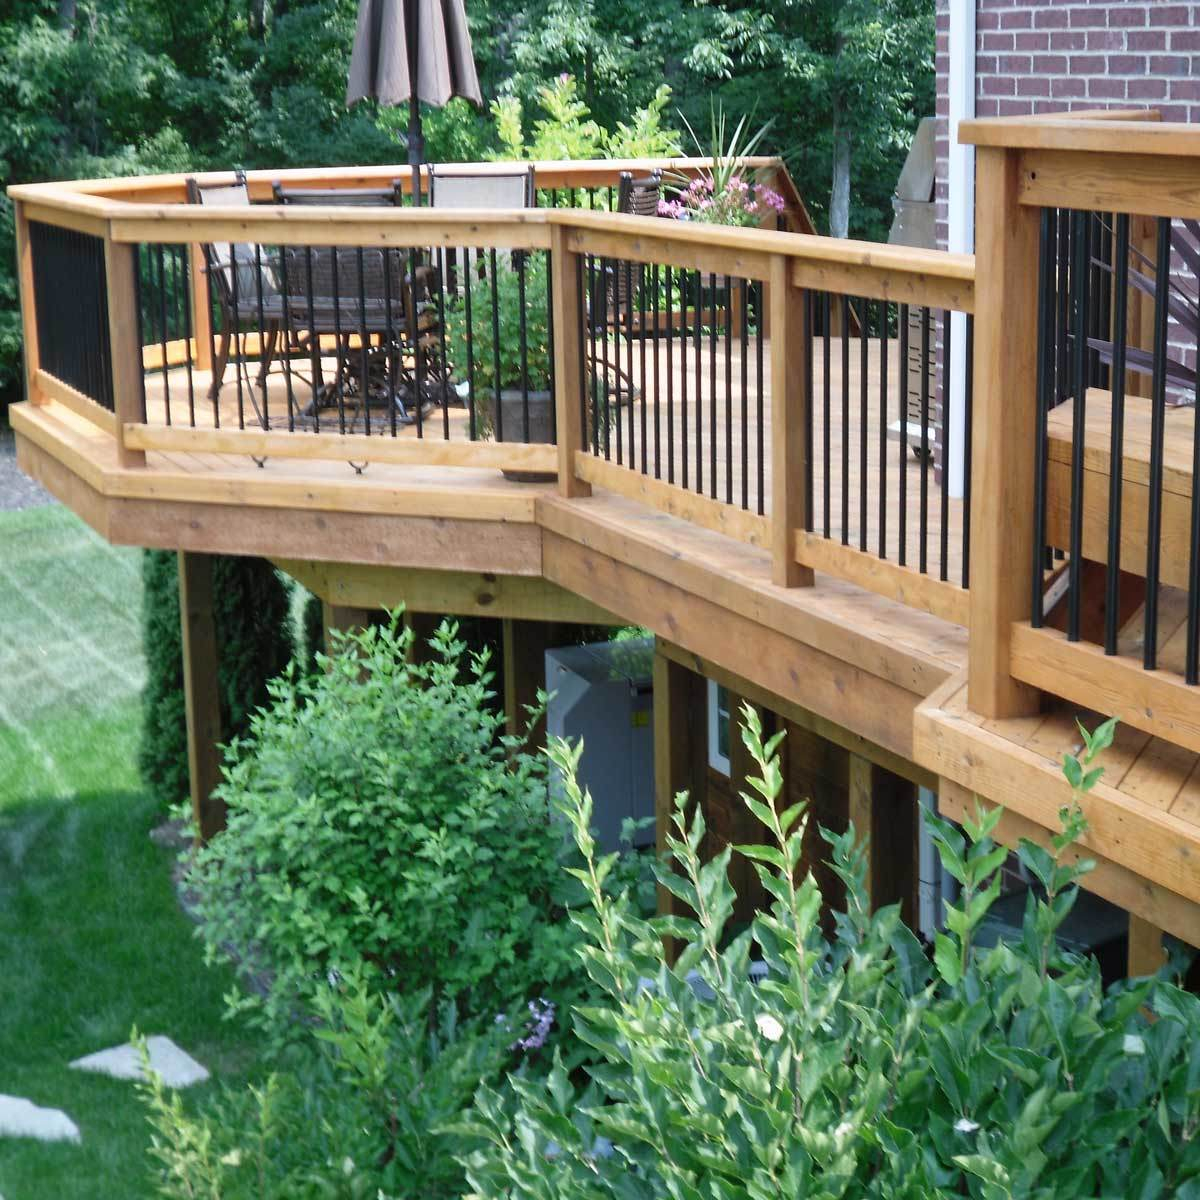 10 Inspiring Deck Designs The Family Handyman intended for dimensions 1200 X 1200